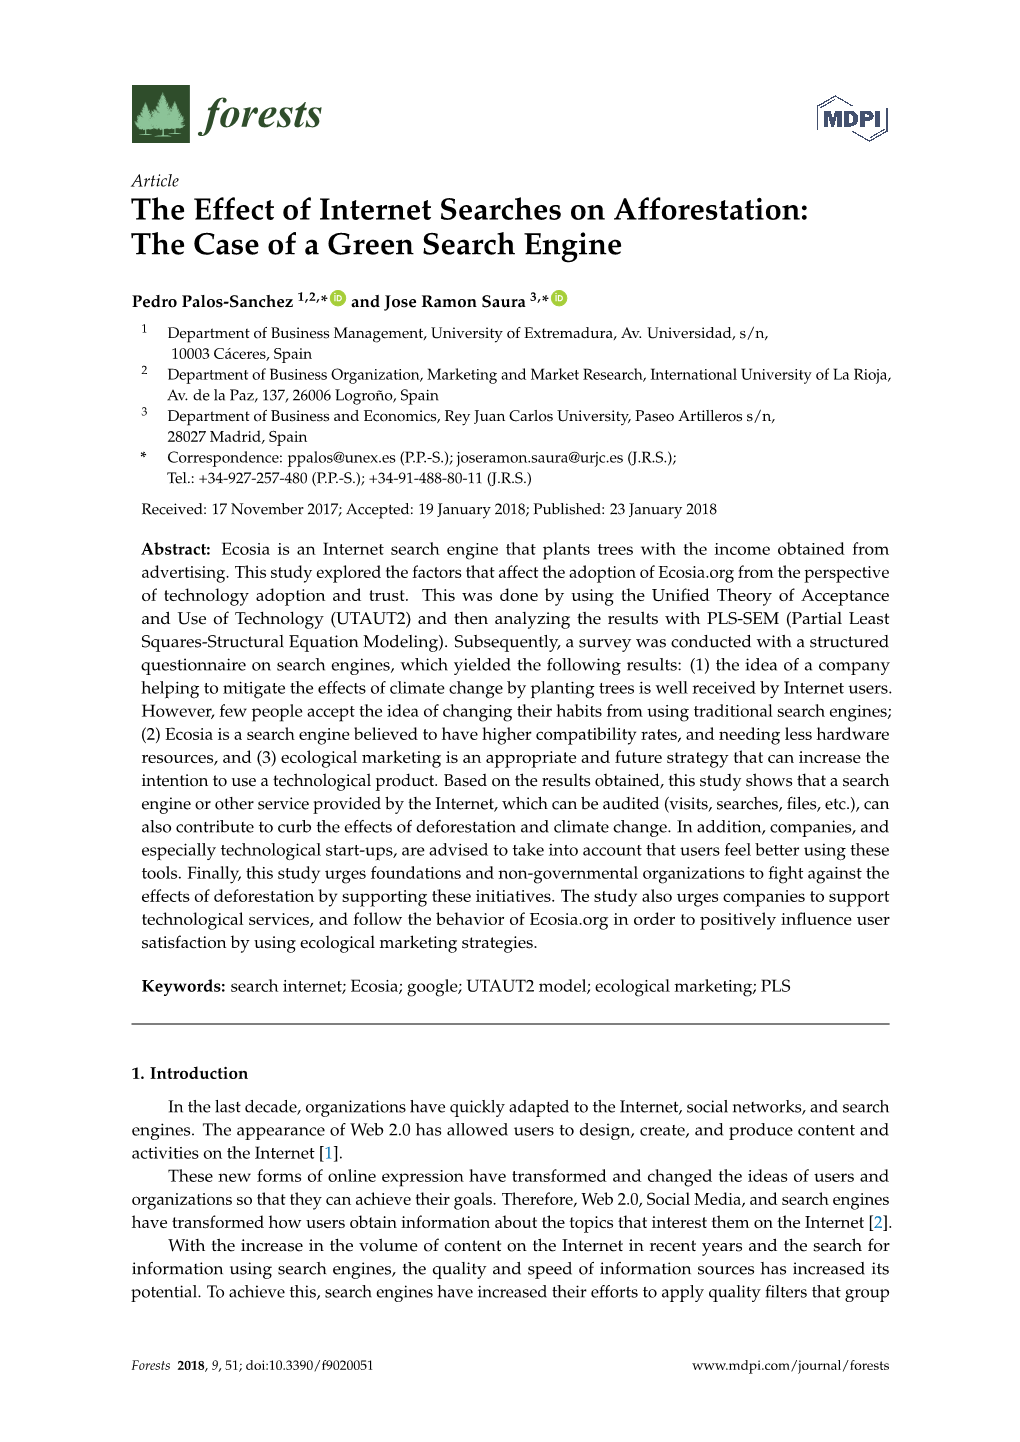 The Case of a Green Search Engine